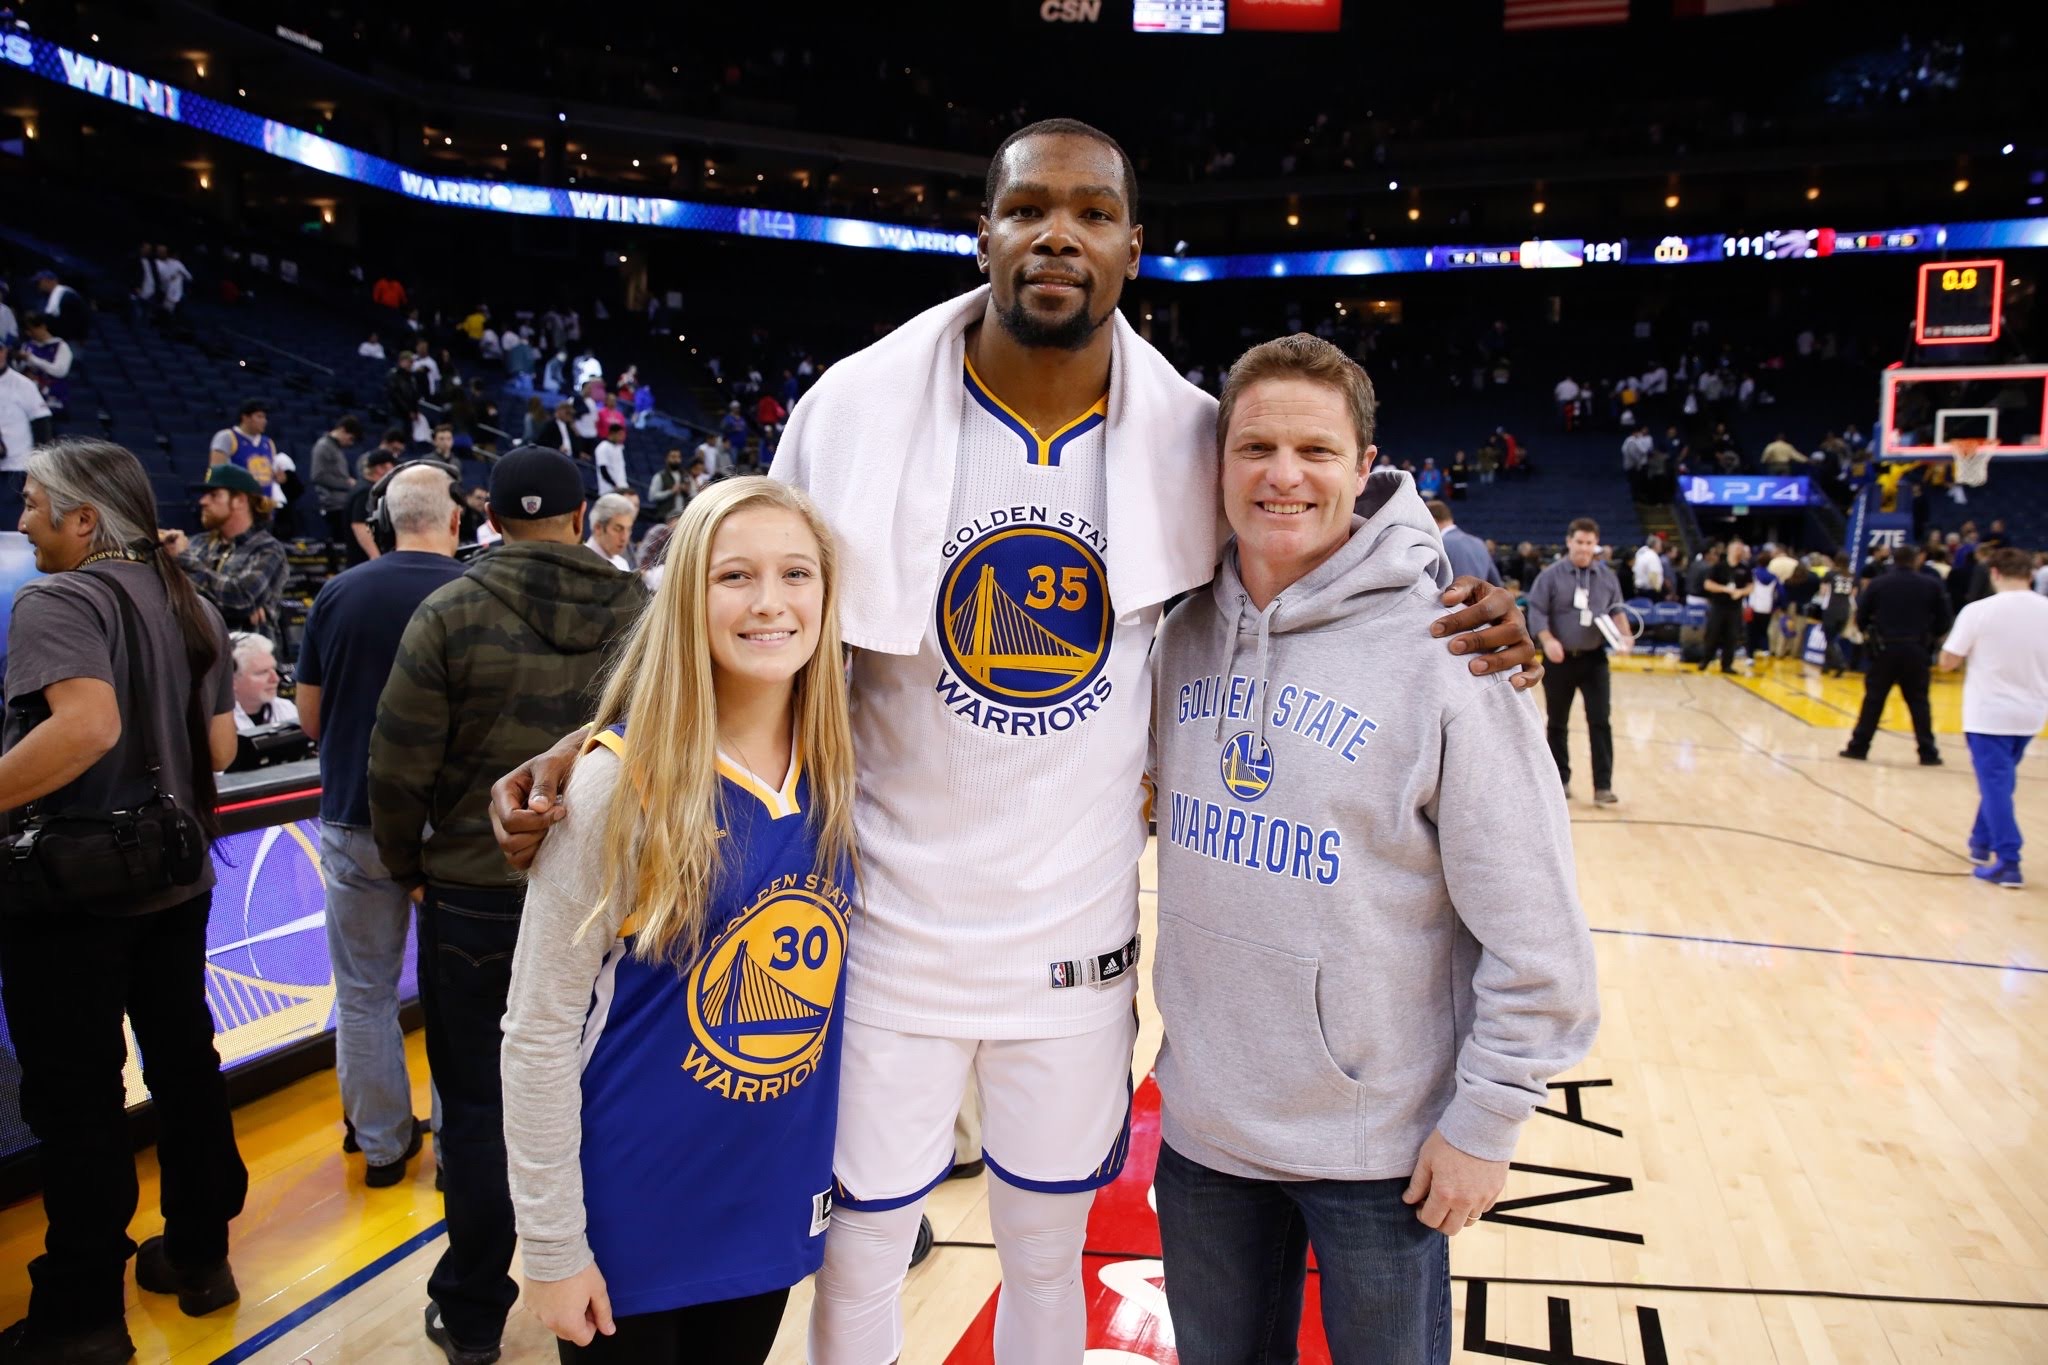  Allison Tegner is a lifelong Golden State Warriors fan and got to meet Kevin Durant on the court after a game. 